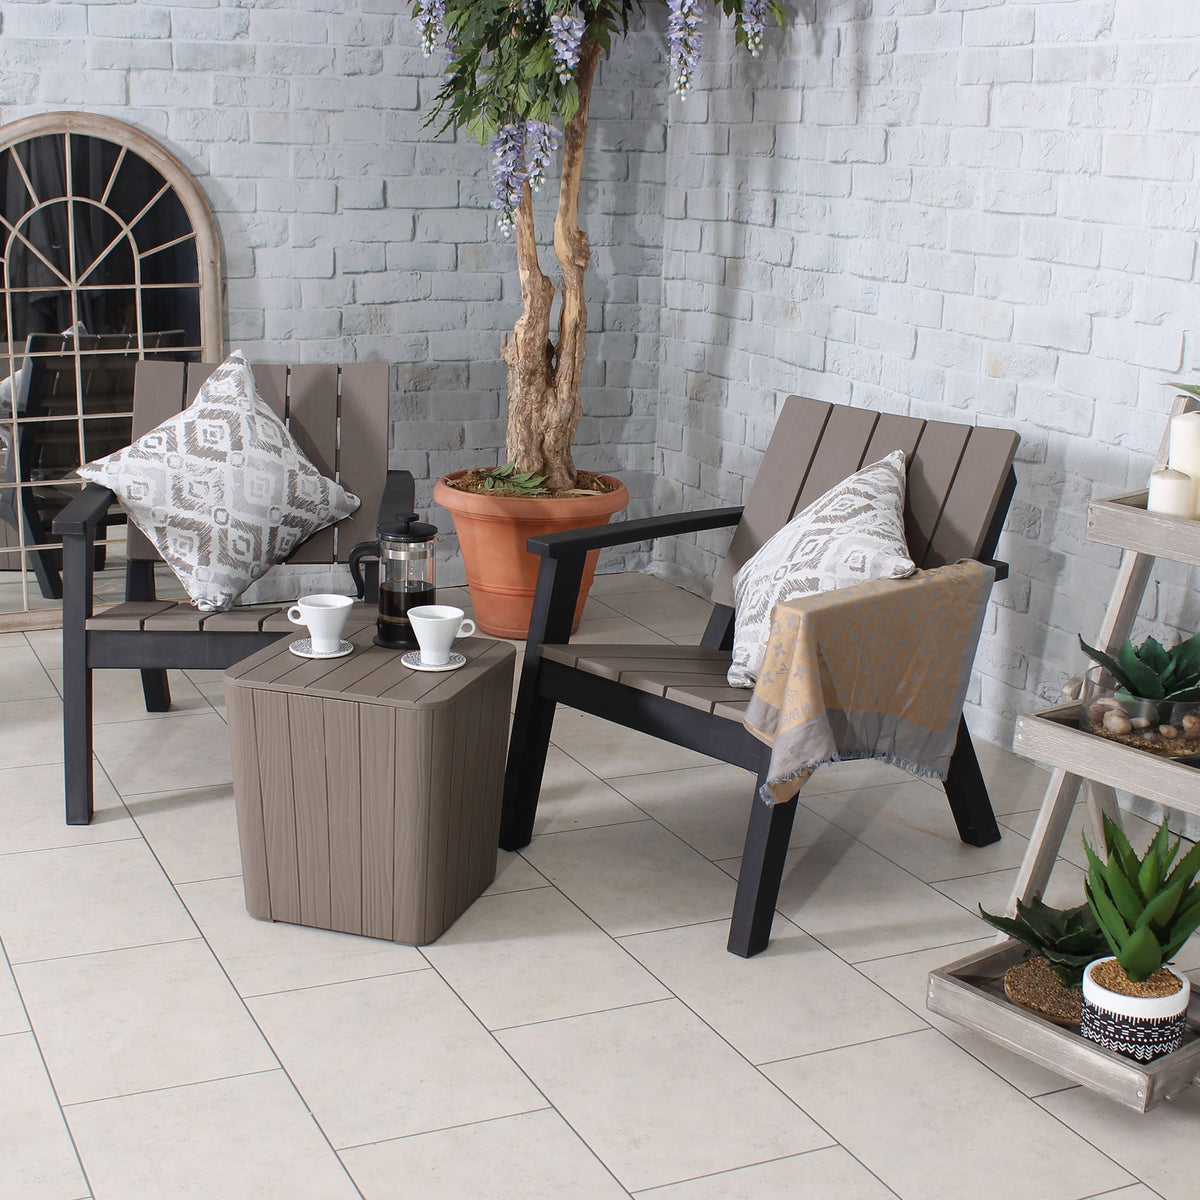 Faro 2 Seater Patio Bistro Set with Coffee Table